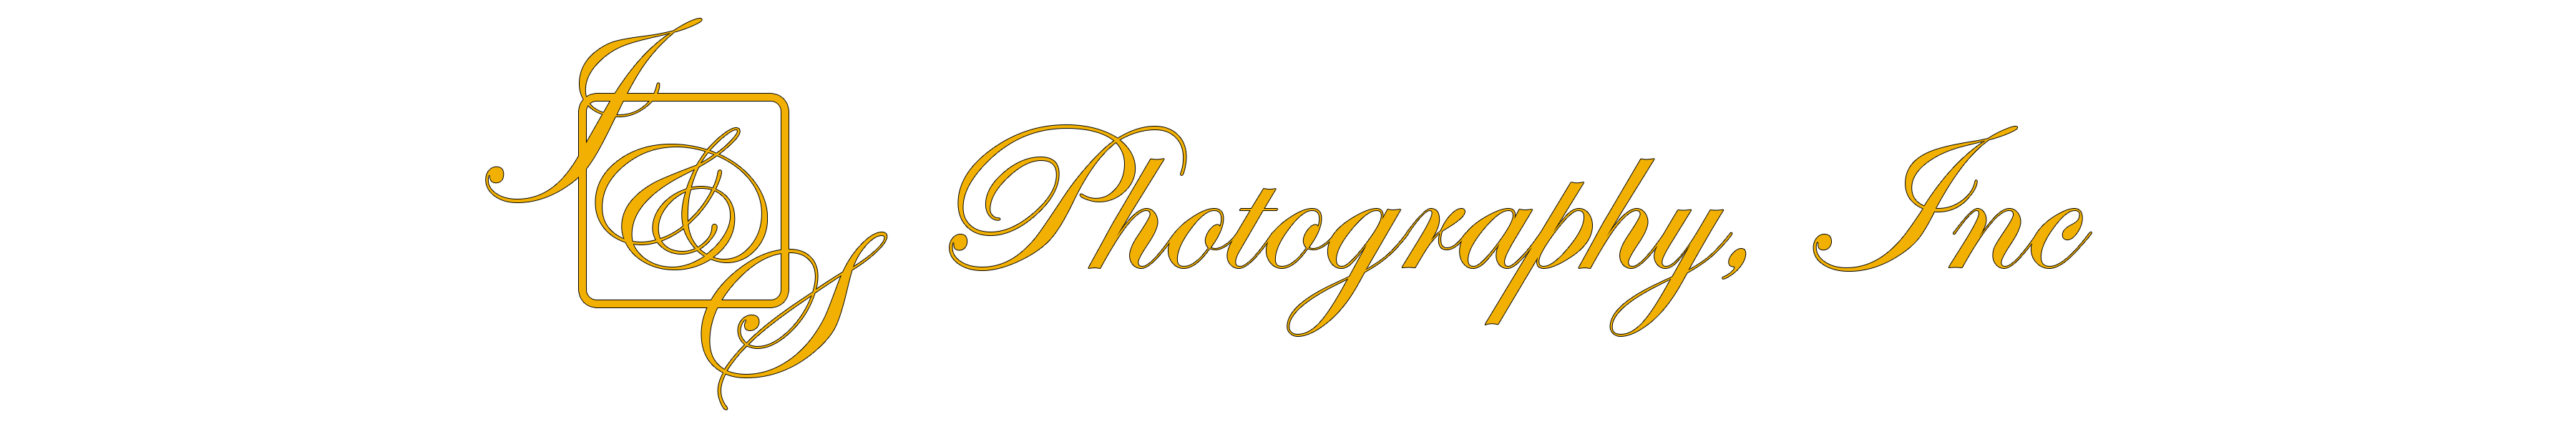 J and S Photography, Inc.